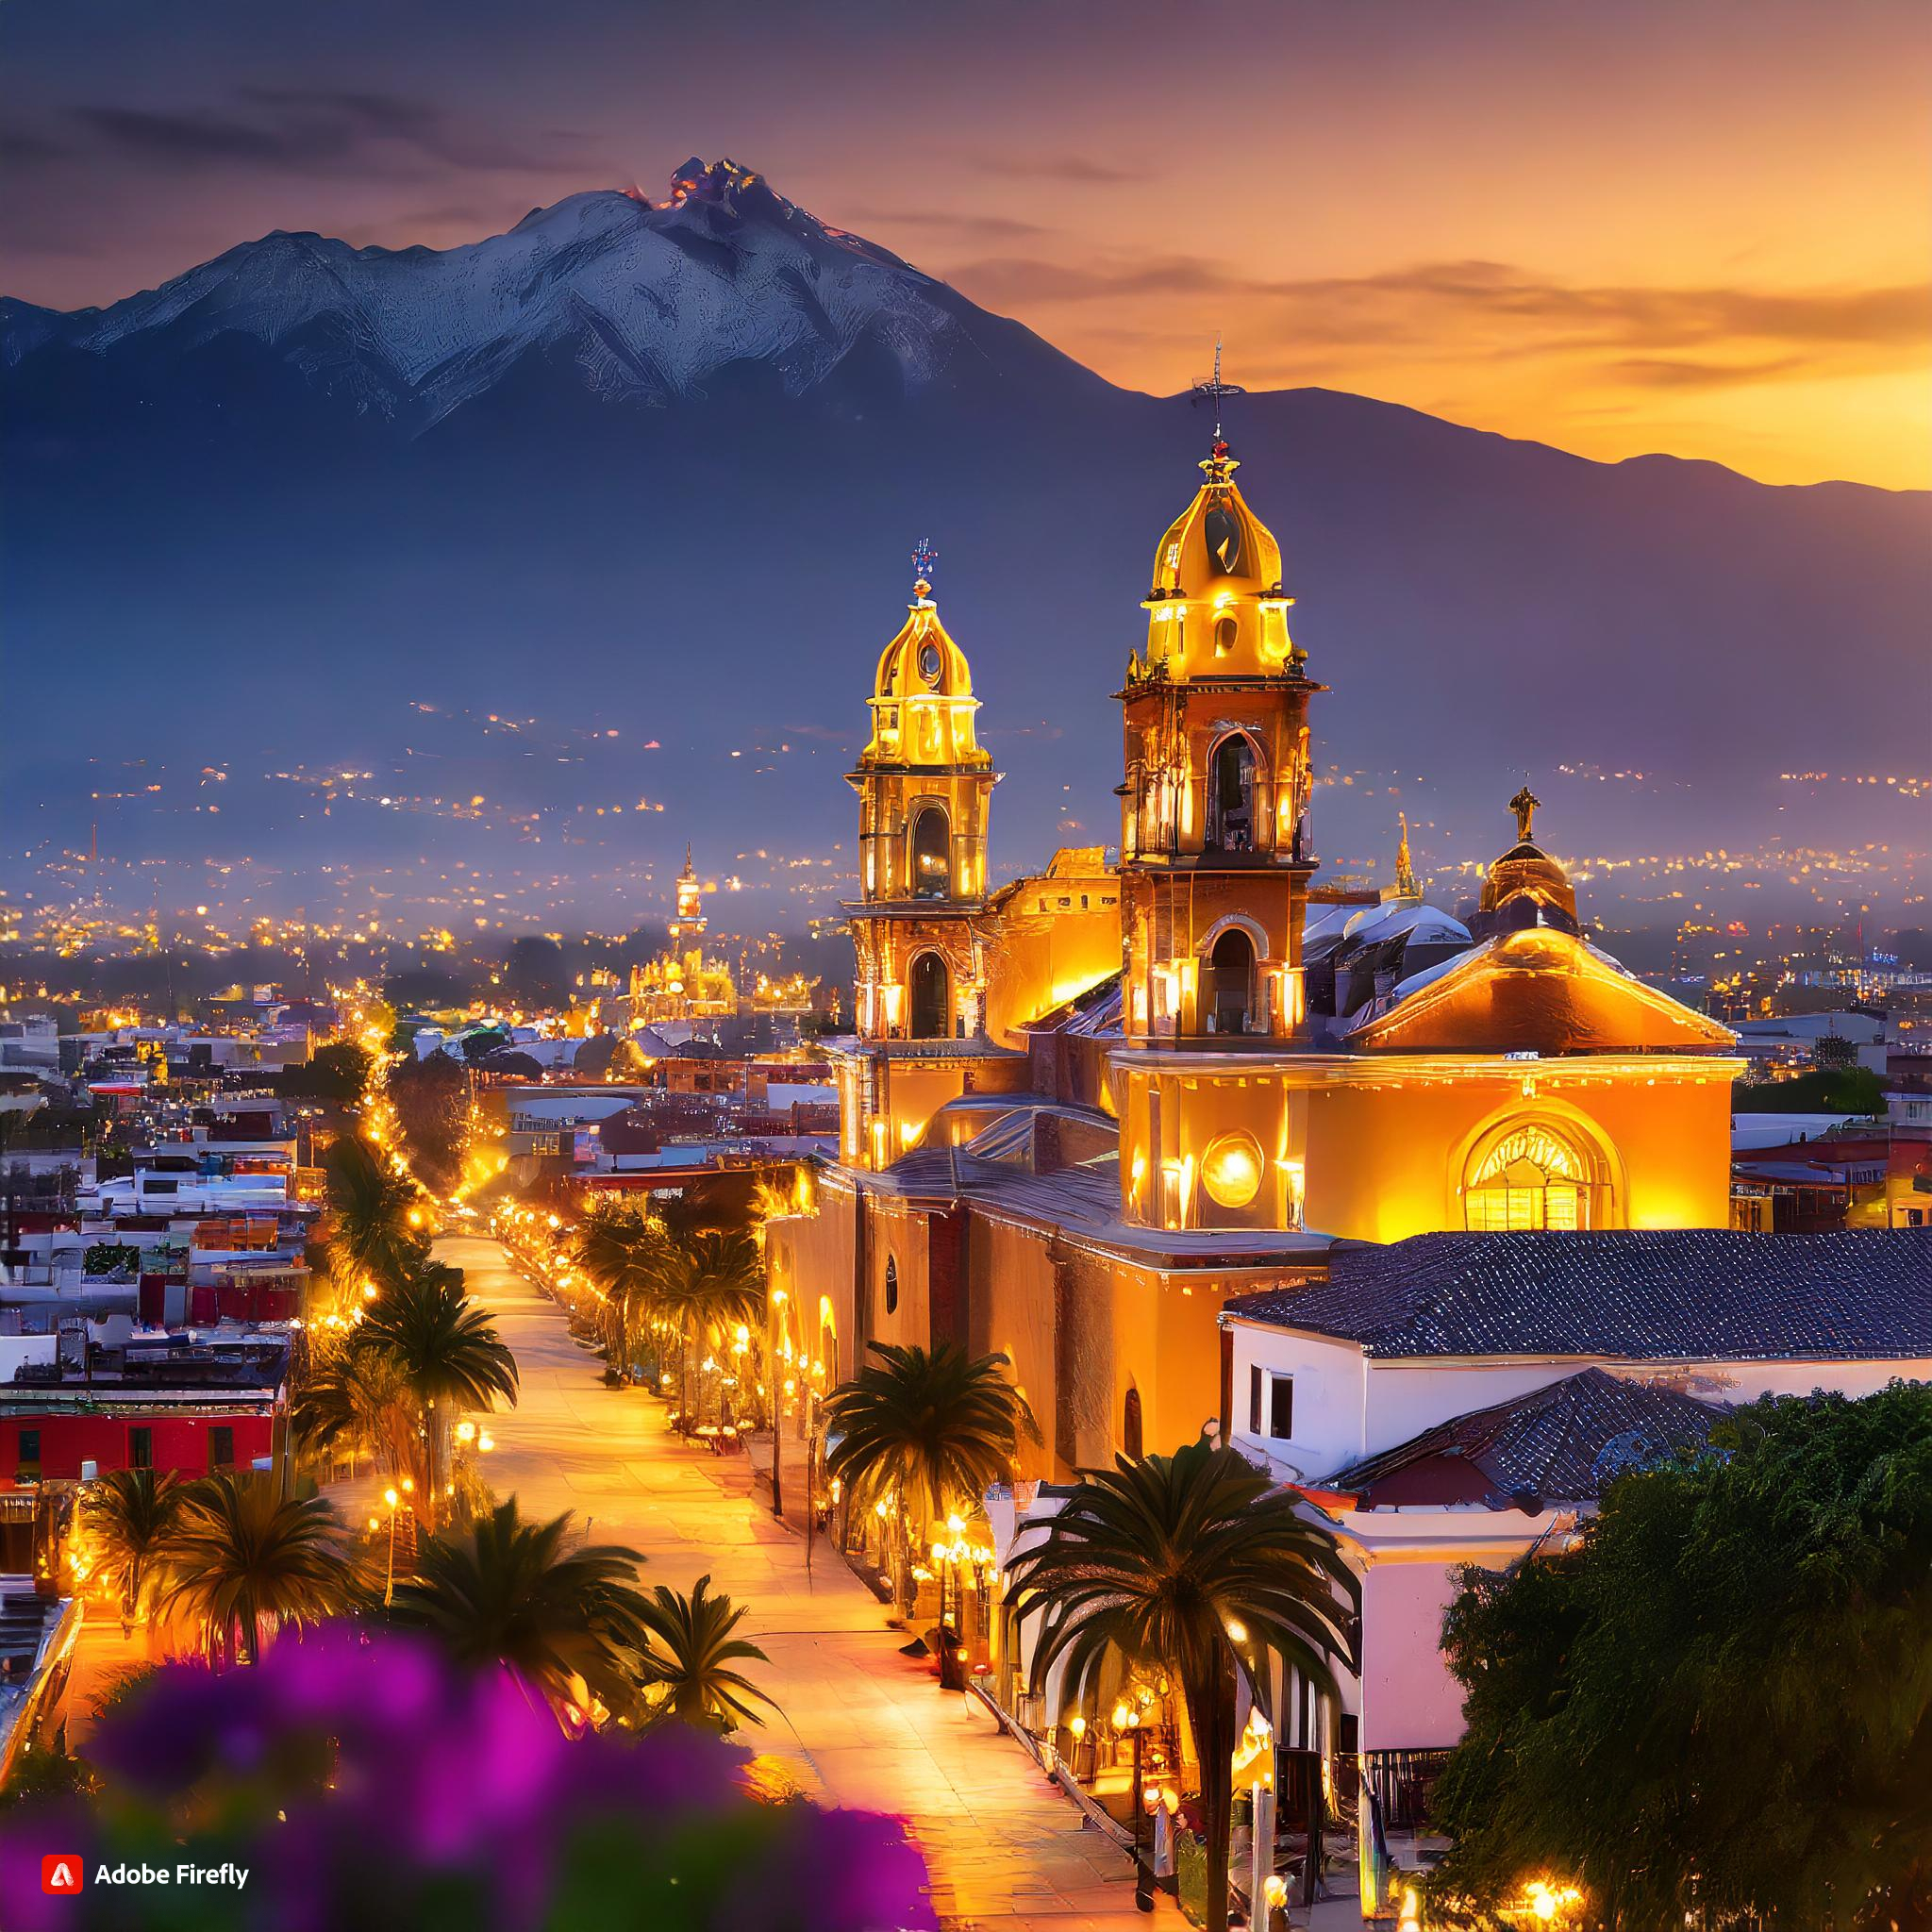  City of Tepic in romantic lighting at night